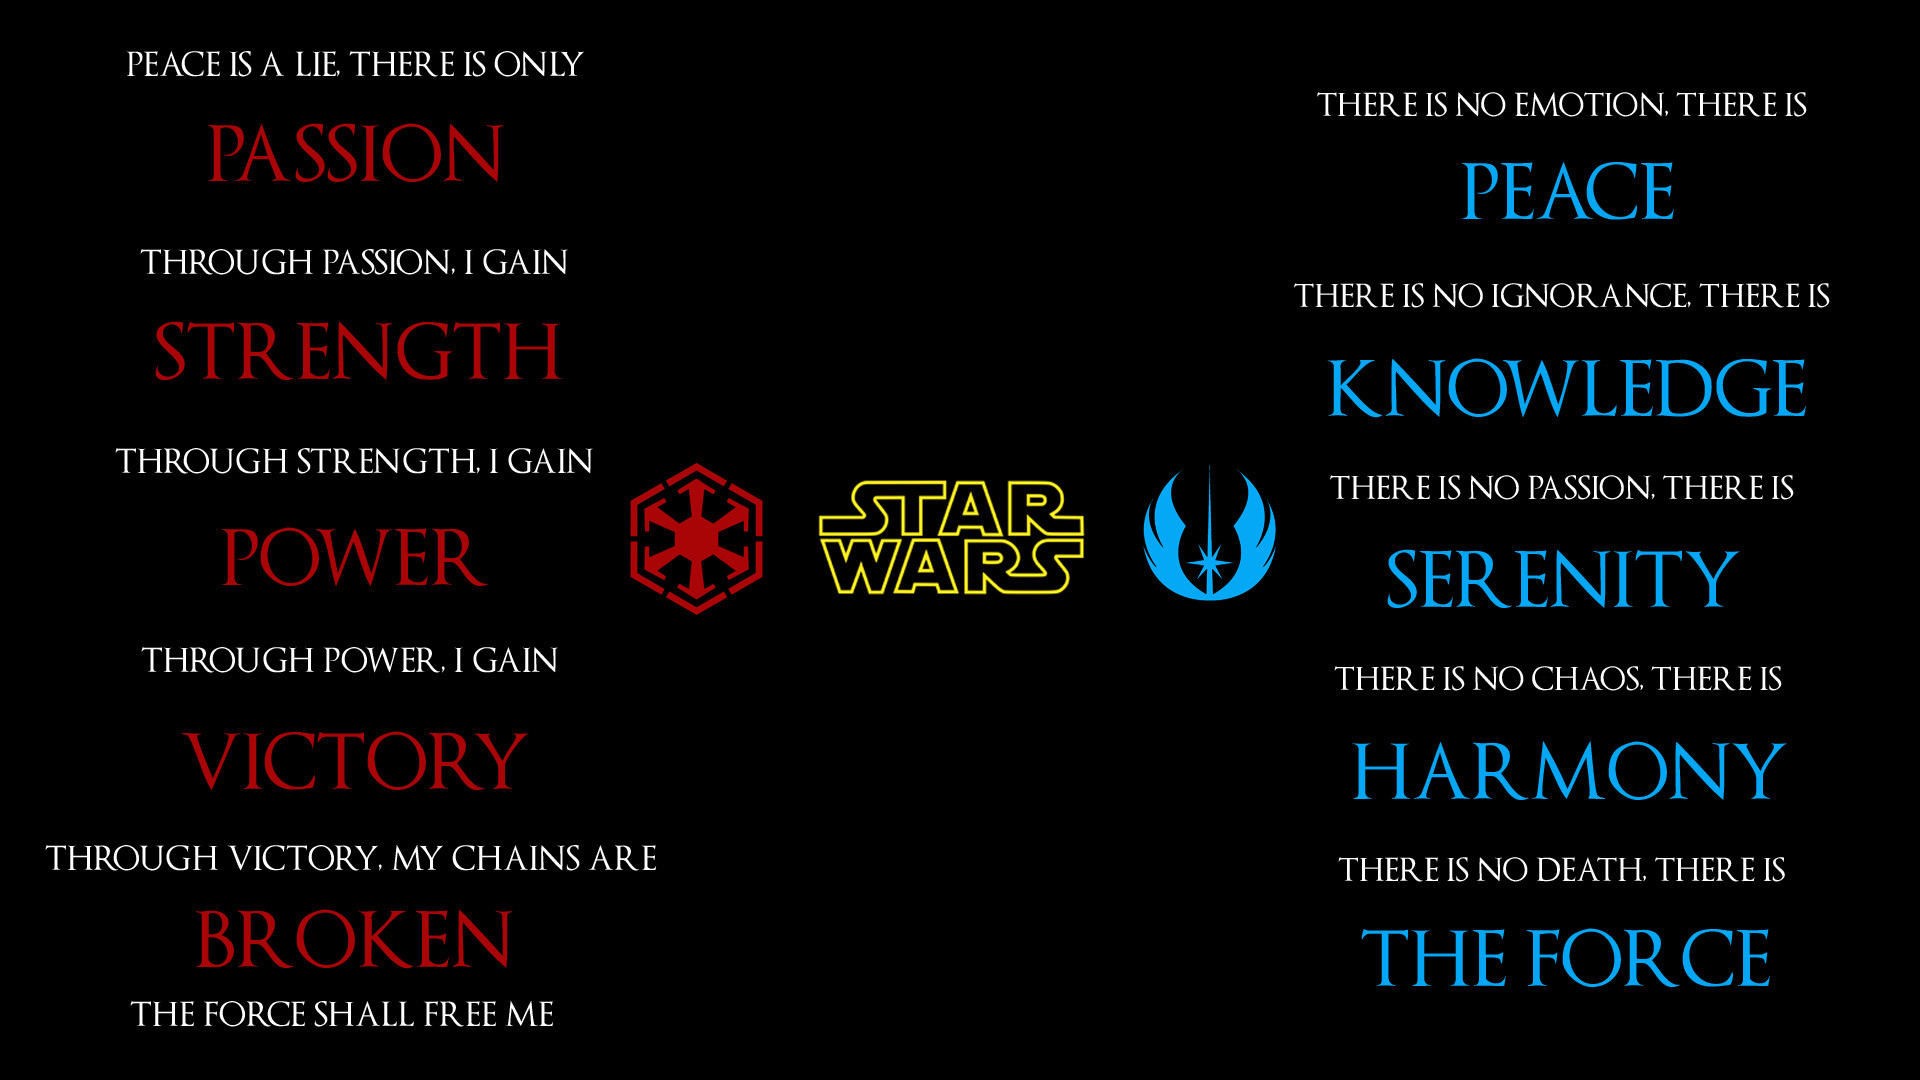 Variants for only Sith, or only Jedi qBQGH Edited so that The Force is highlighted in the Sith Code, Rather than Broken